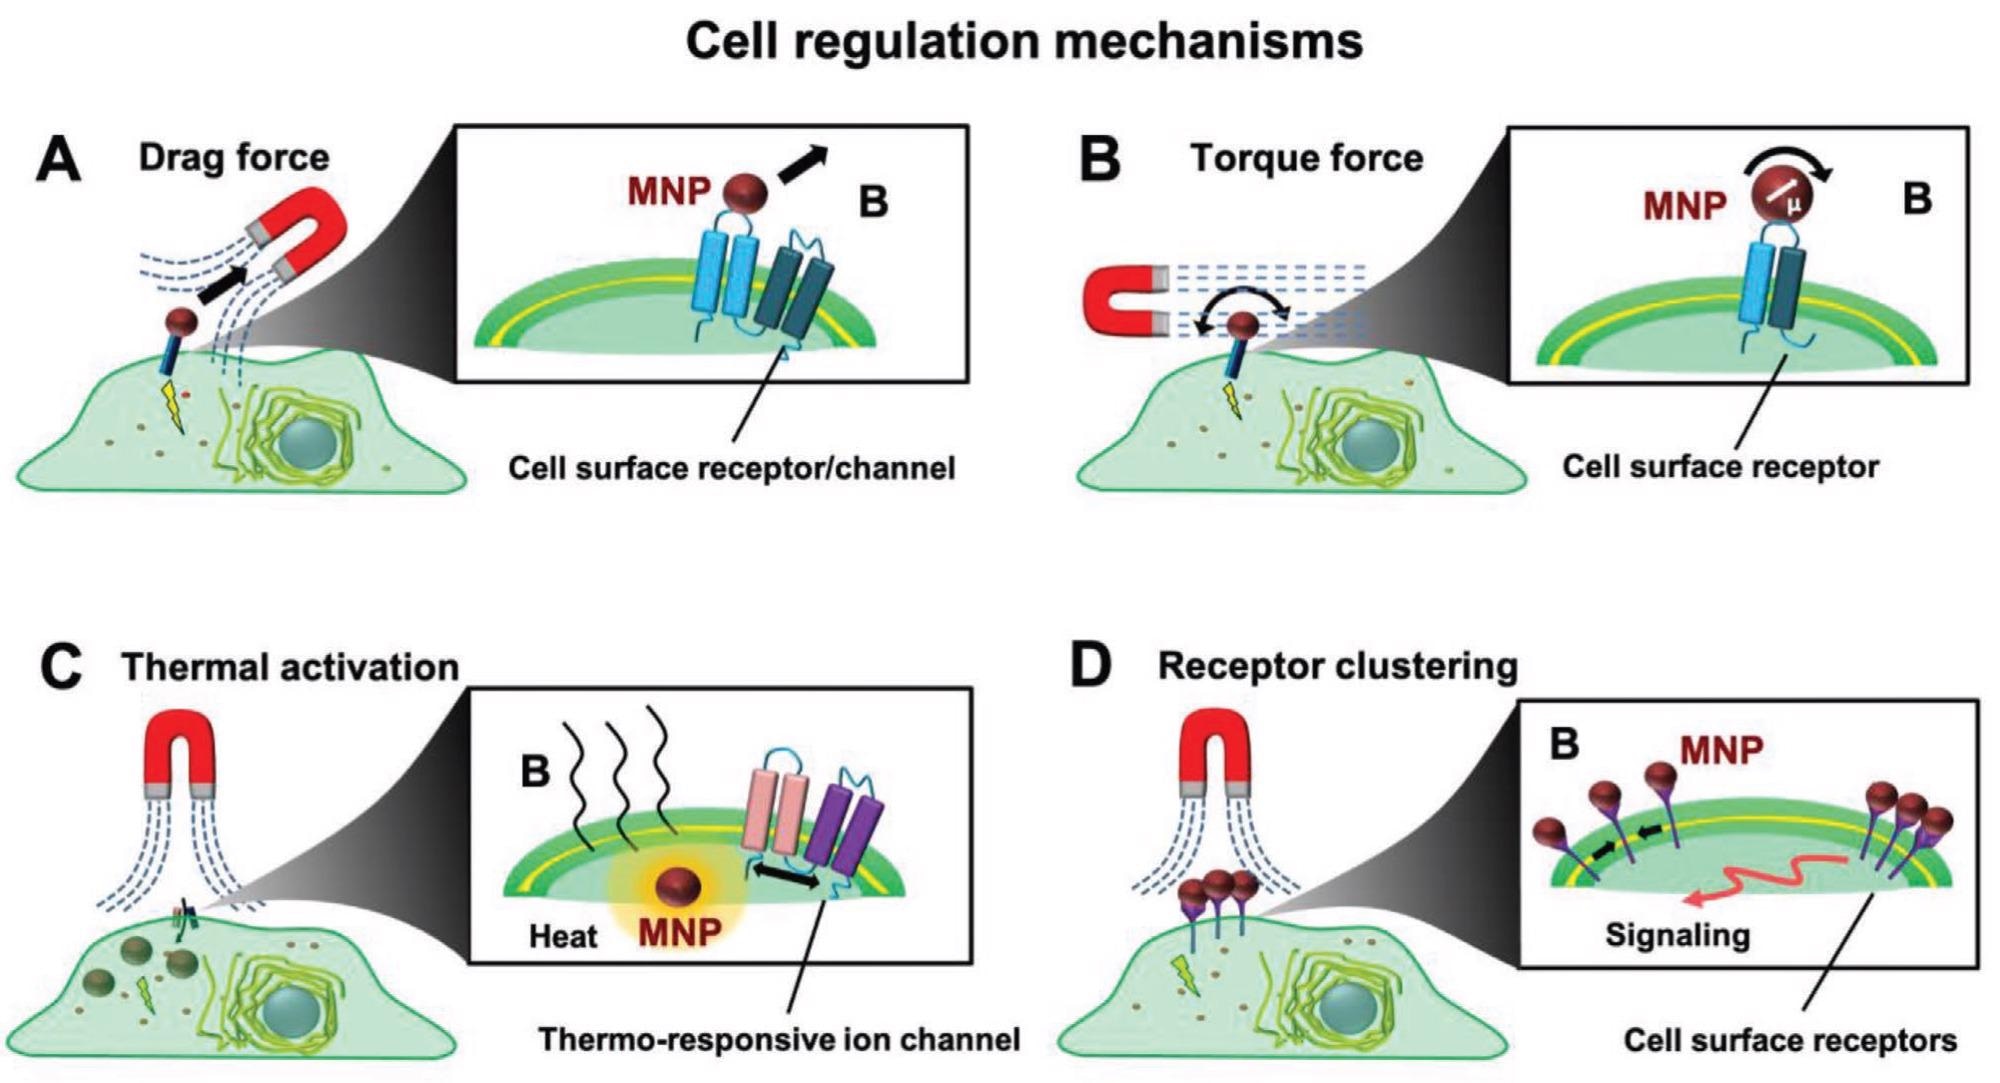 Modulation of biological cell behavior via magnetic actuation. Intracellular signaling can be magnetically stimulated by MNPs that operate A) drag or B) torque forces on the receptors that are present on the cell membrane, C) modulate the activity of thermosensitive channels or receptors, or D) cause receptor aggregation and start intracellular signaling.